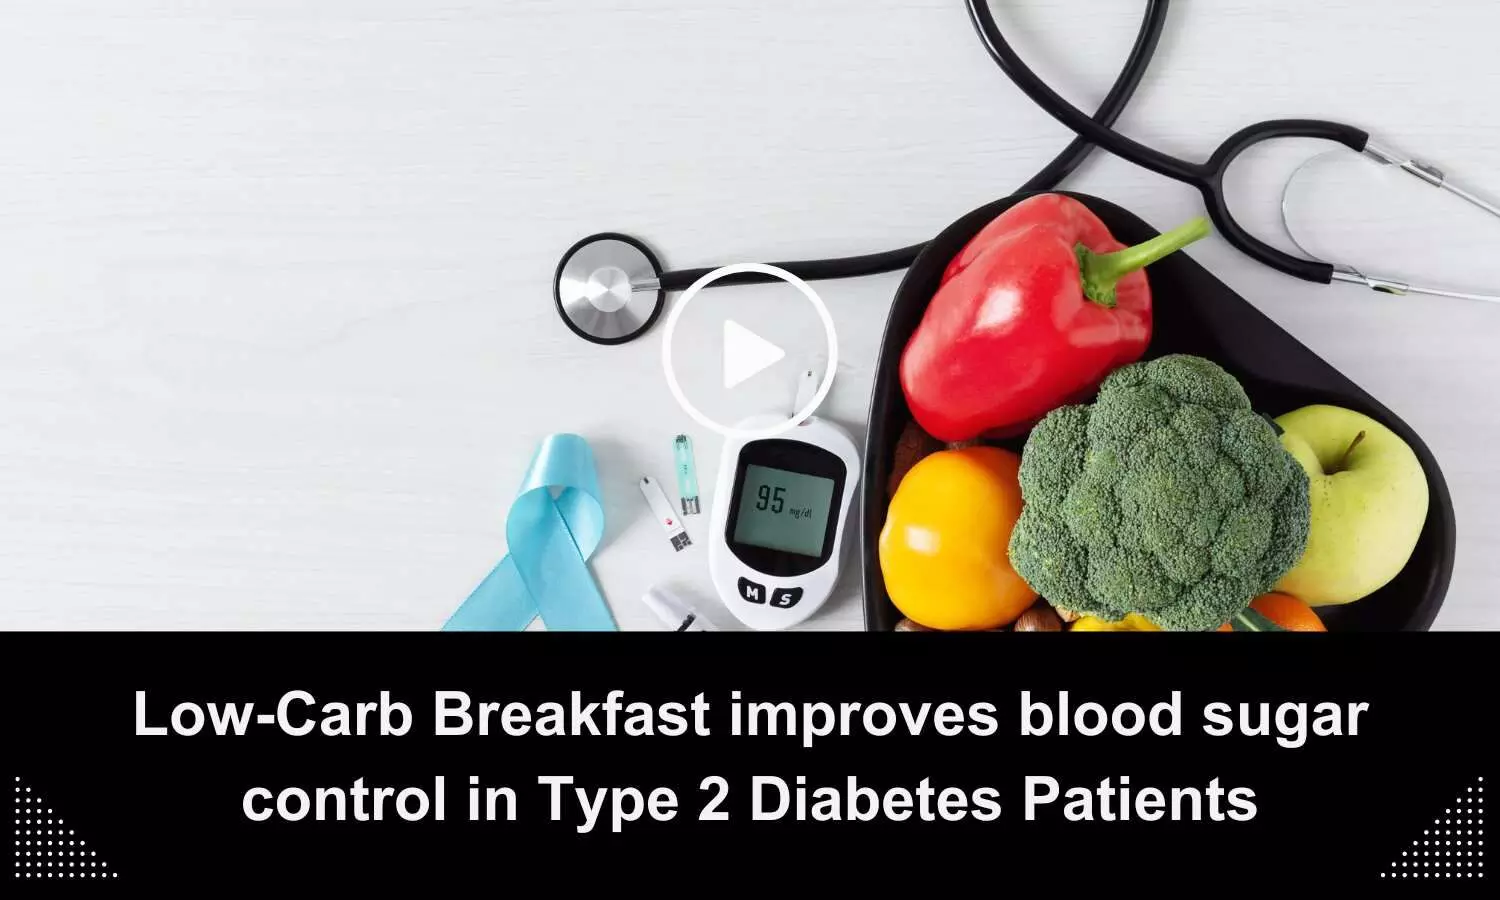 Low-Carb Breakfast improves blood sugar control in Type 2 Diabetes Patients